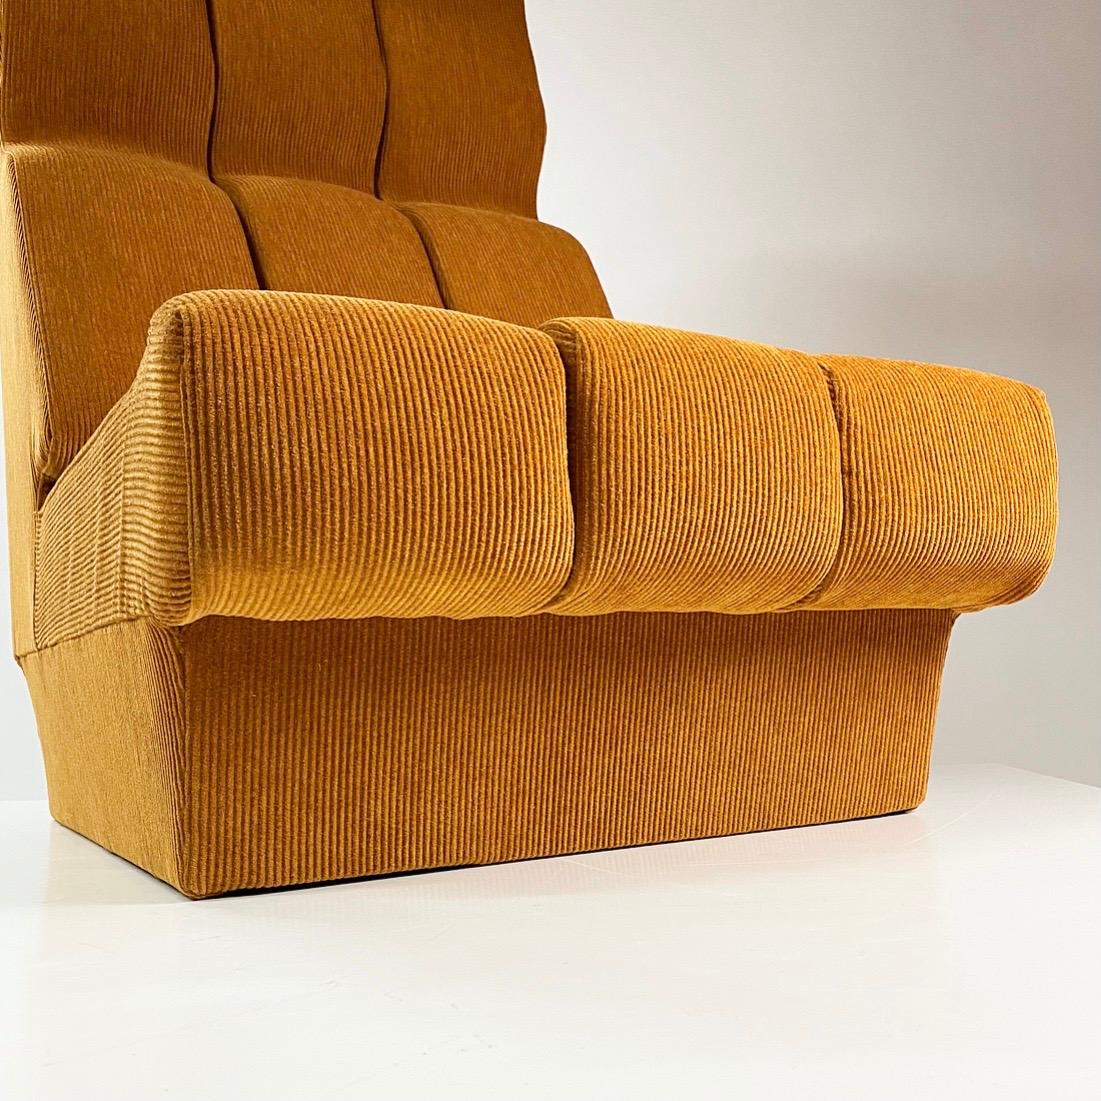 Fabric Interlübke Highback Space Age Seat with New Upholstery, Germany, 1970 For Sale